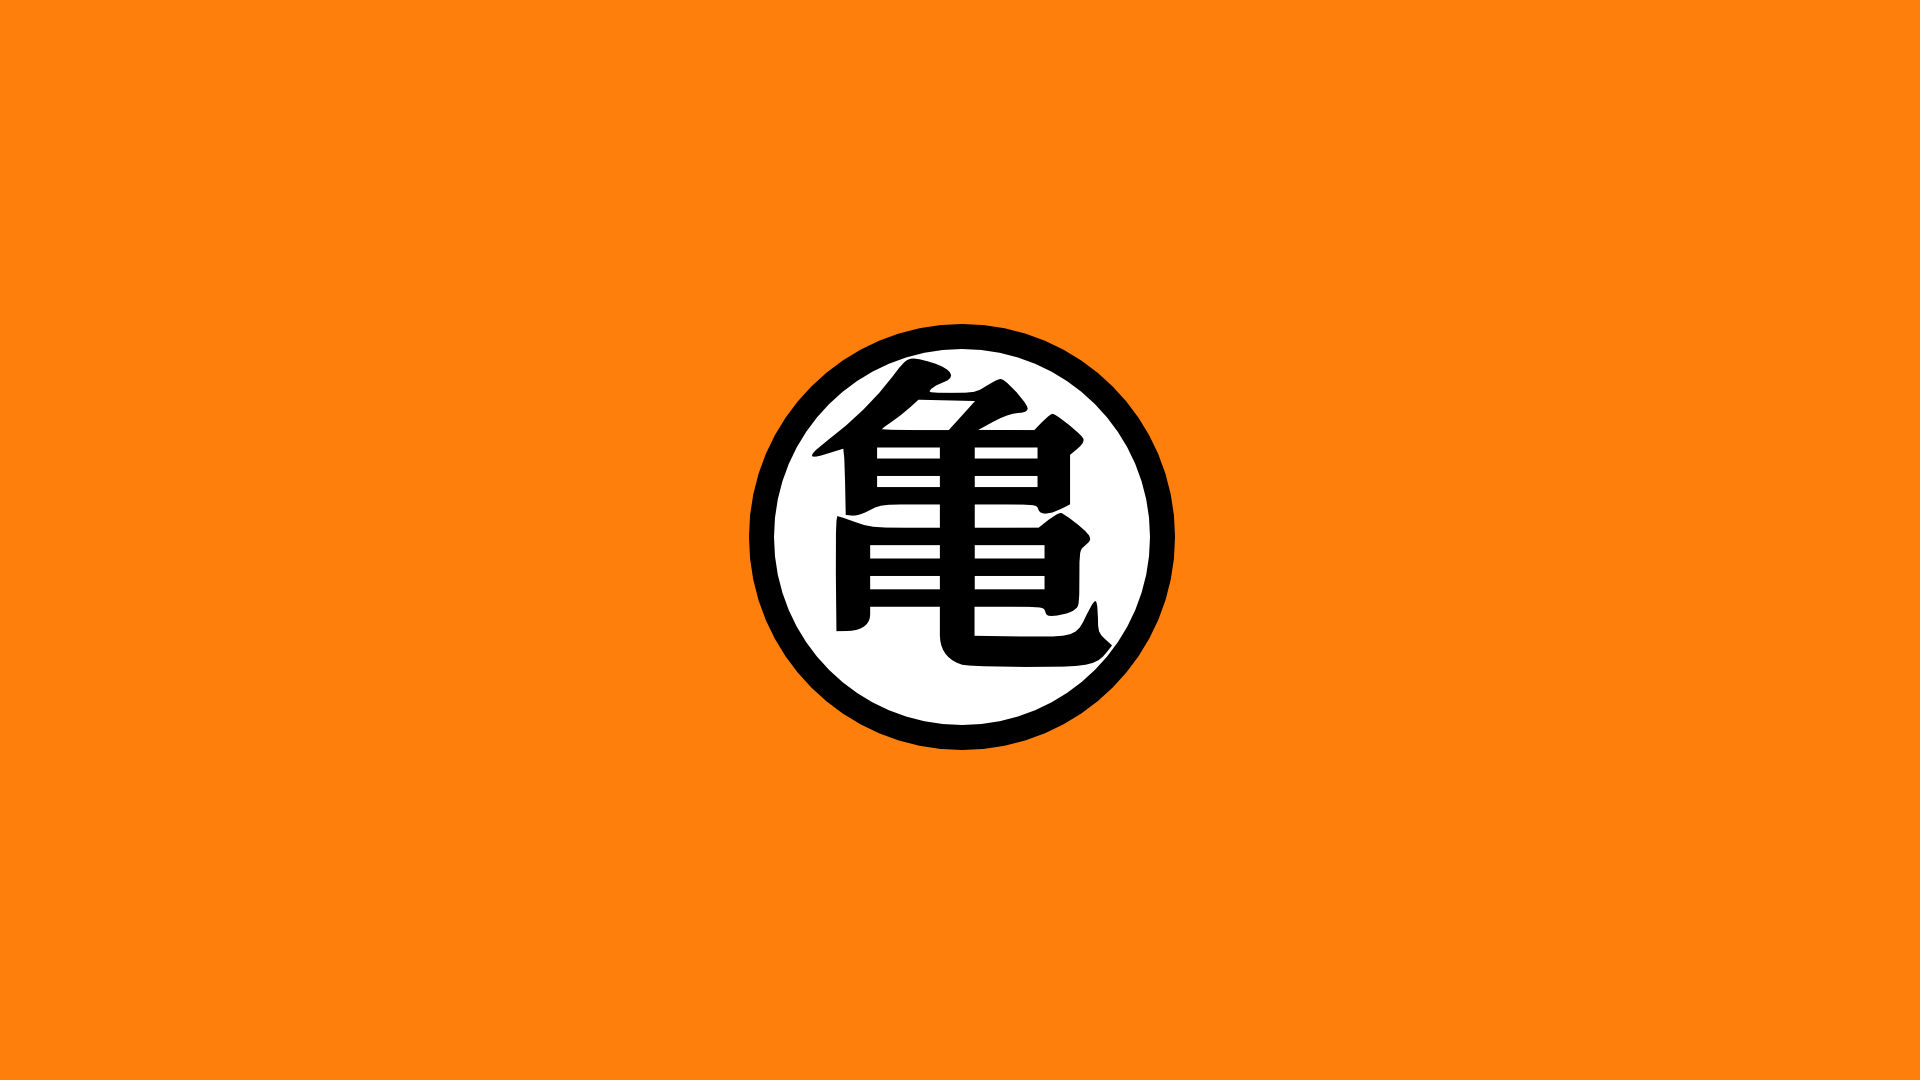 Japanese characters on an orange background Desktop wallpapers 640x480